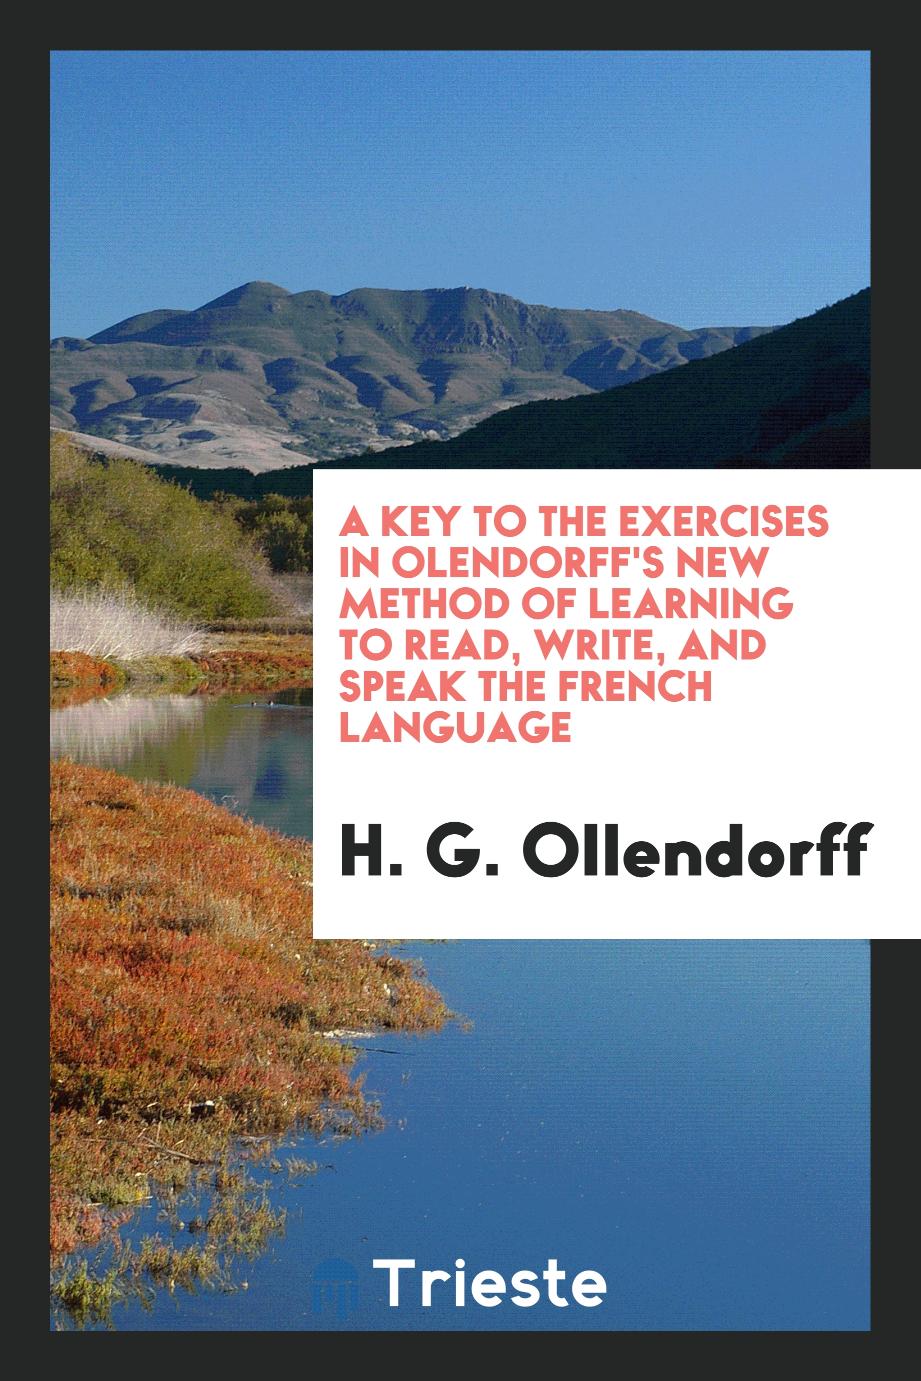 A Key to the Exercises in Olendorff's New Method of Learning to Read, Write, and Speak the French Language